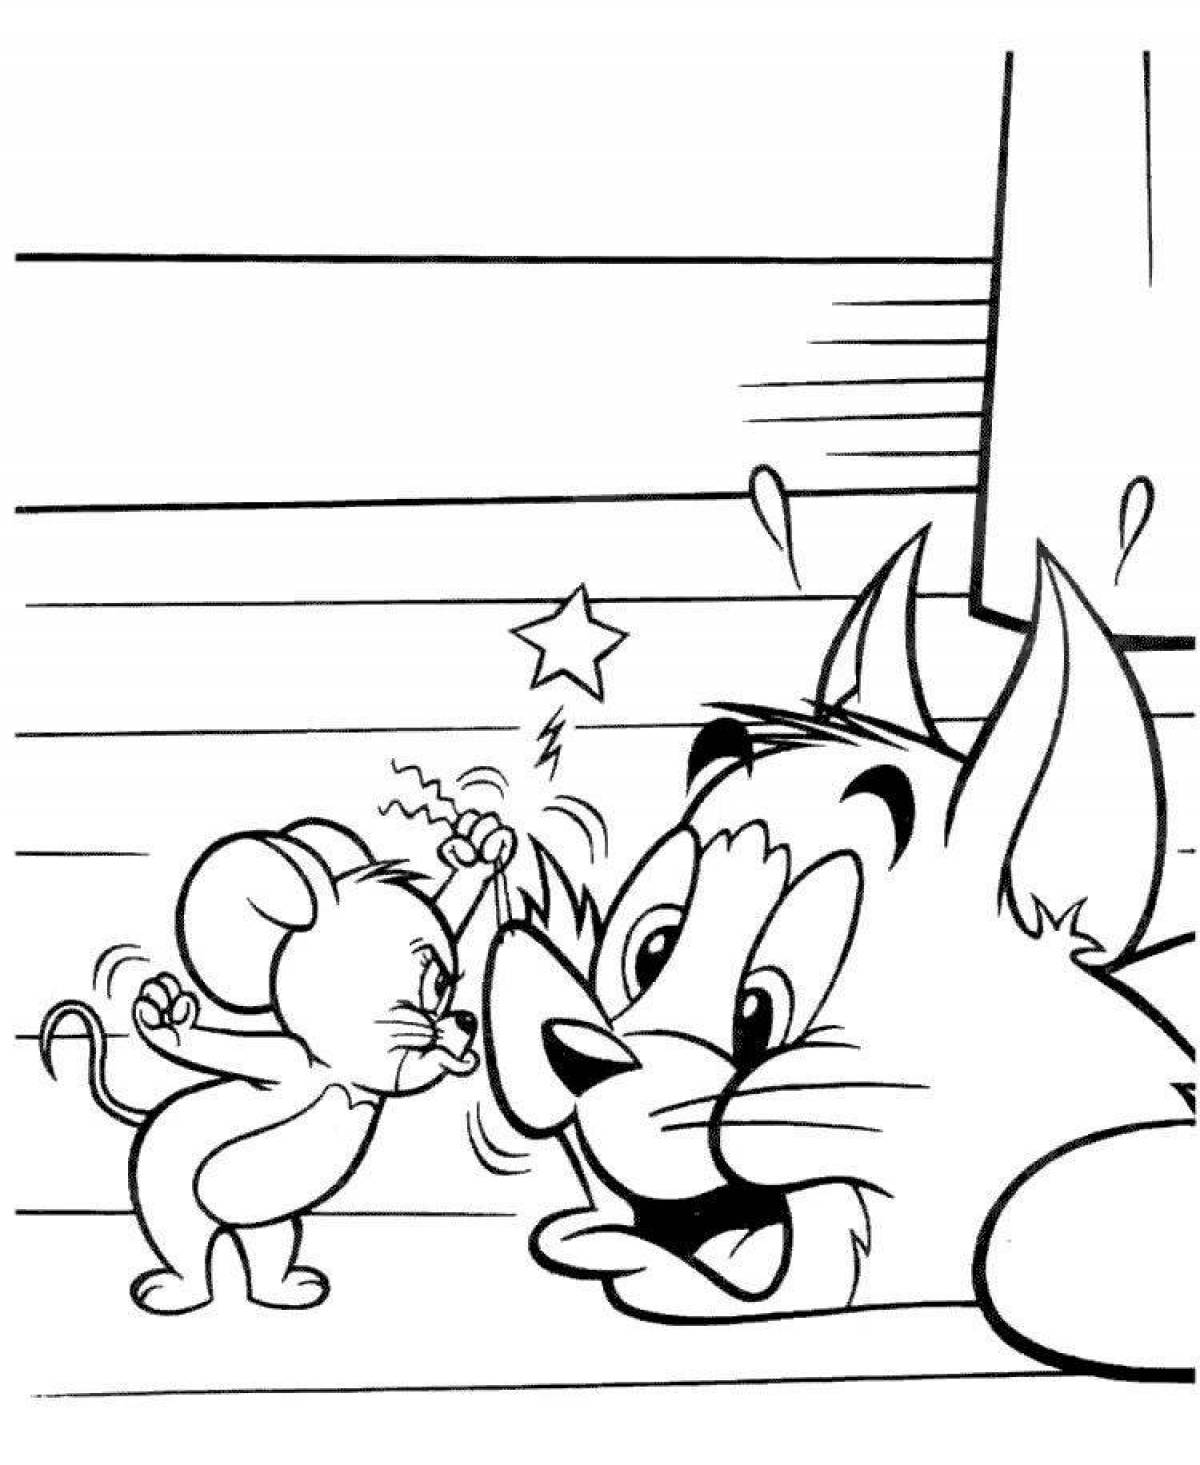 Quirky tom and jerry coloring book